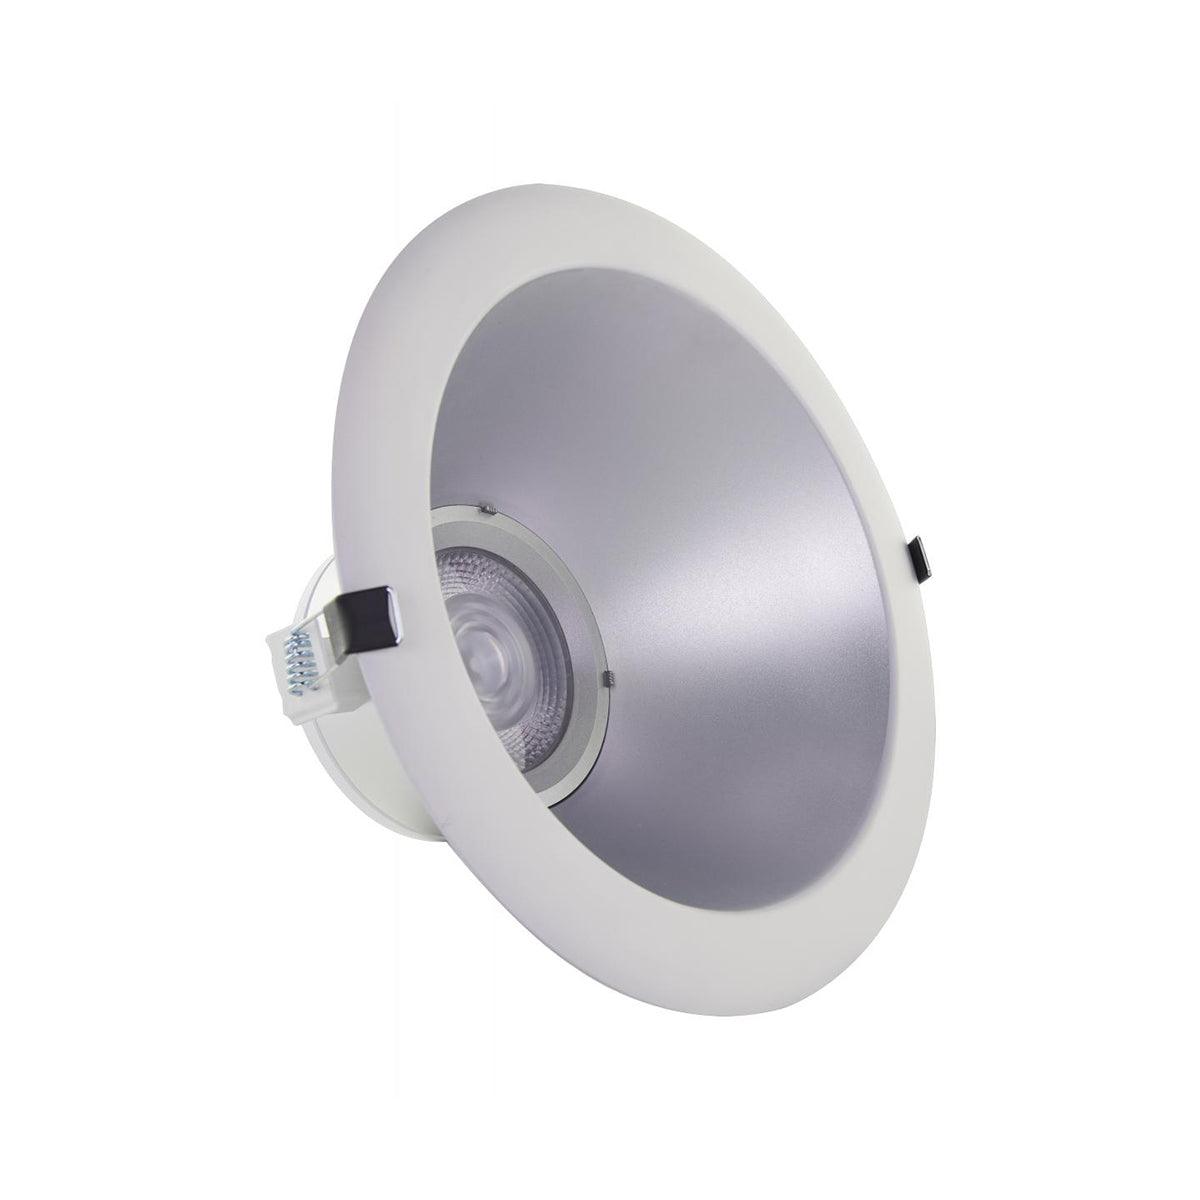 4 In. Commercial Canless LED Recessed Light, 15 Watt, 1020 Lumens, Selectable CCT, 2700K to 5000K, Silver Finish - Bees Lighting